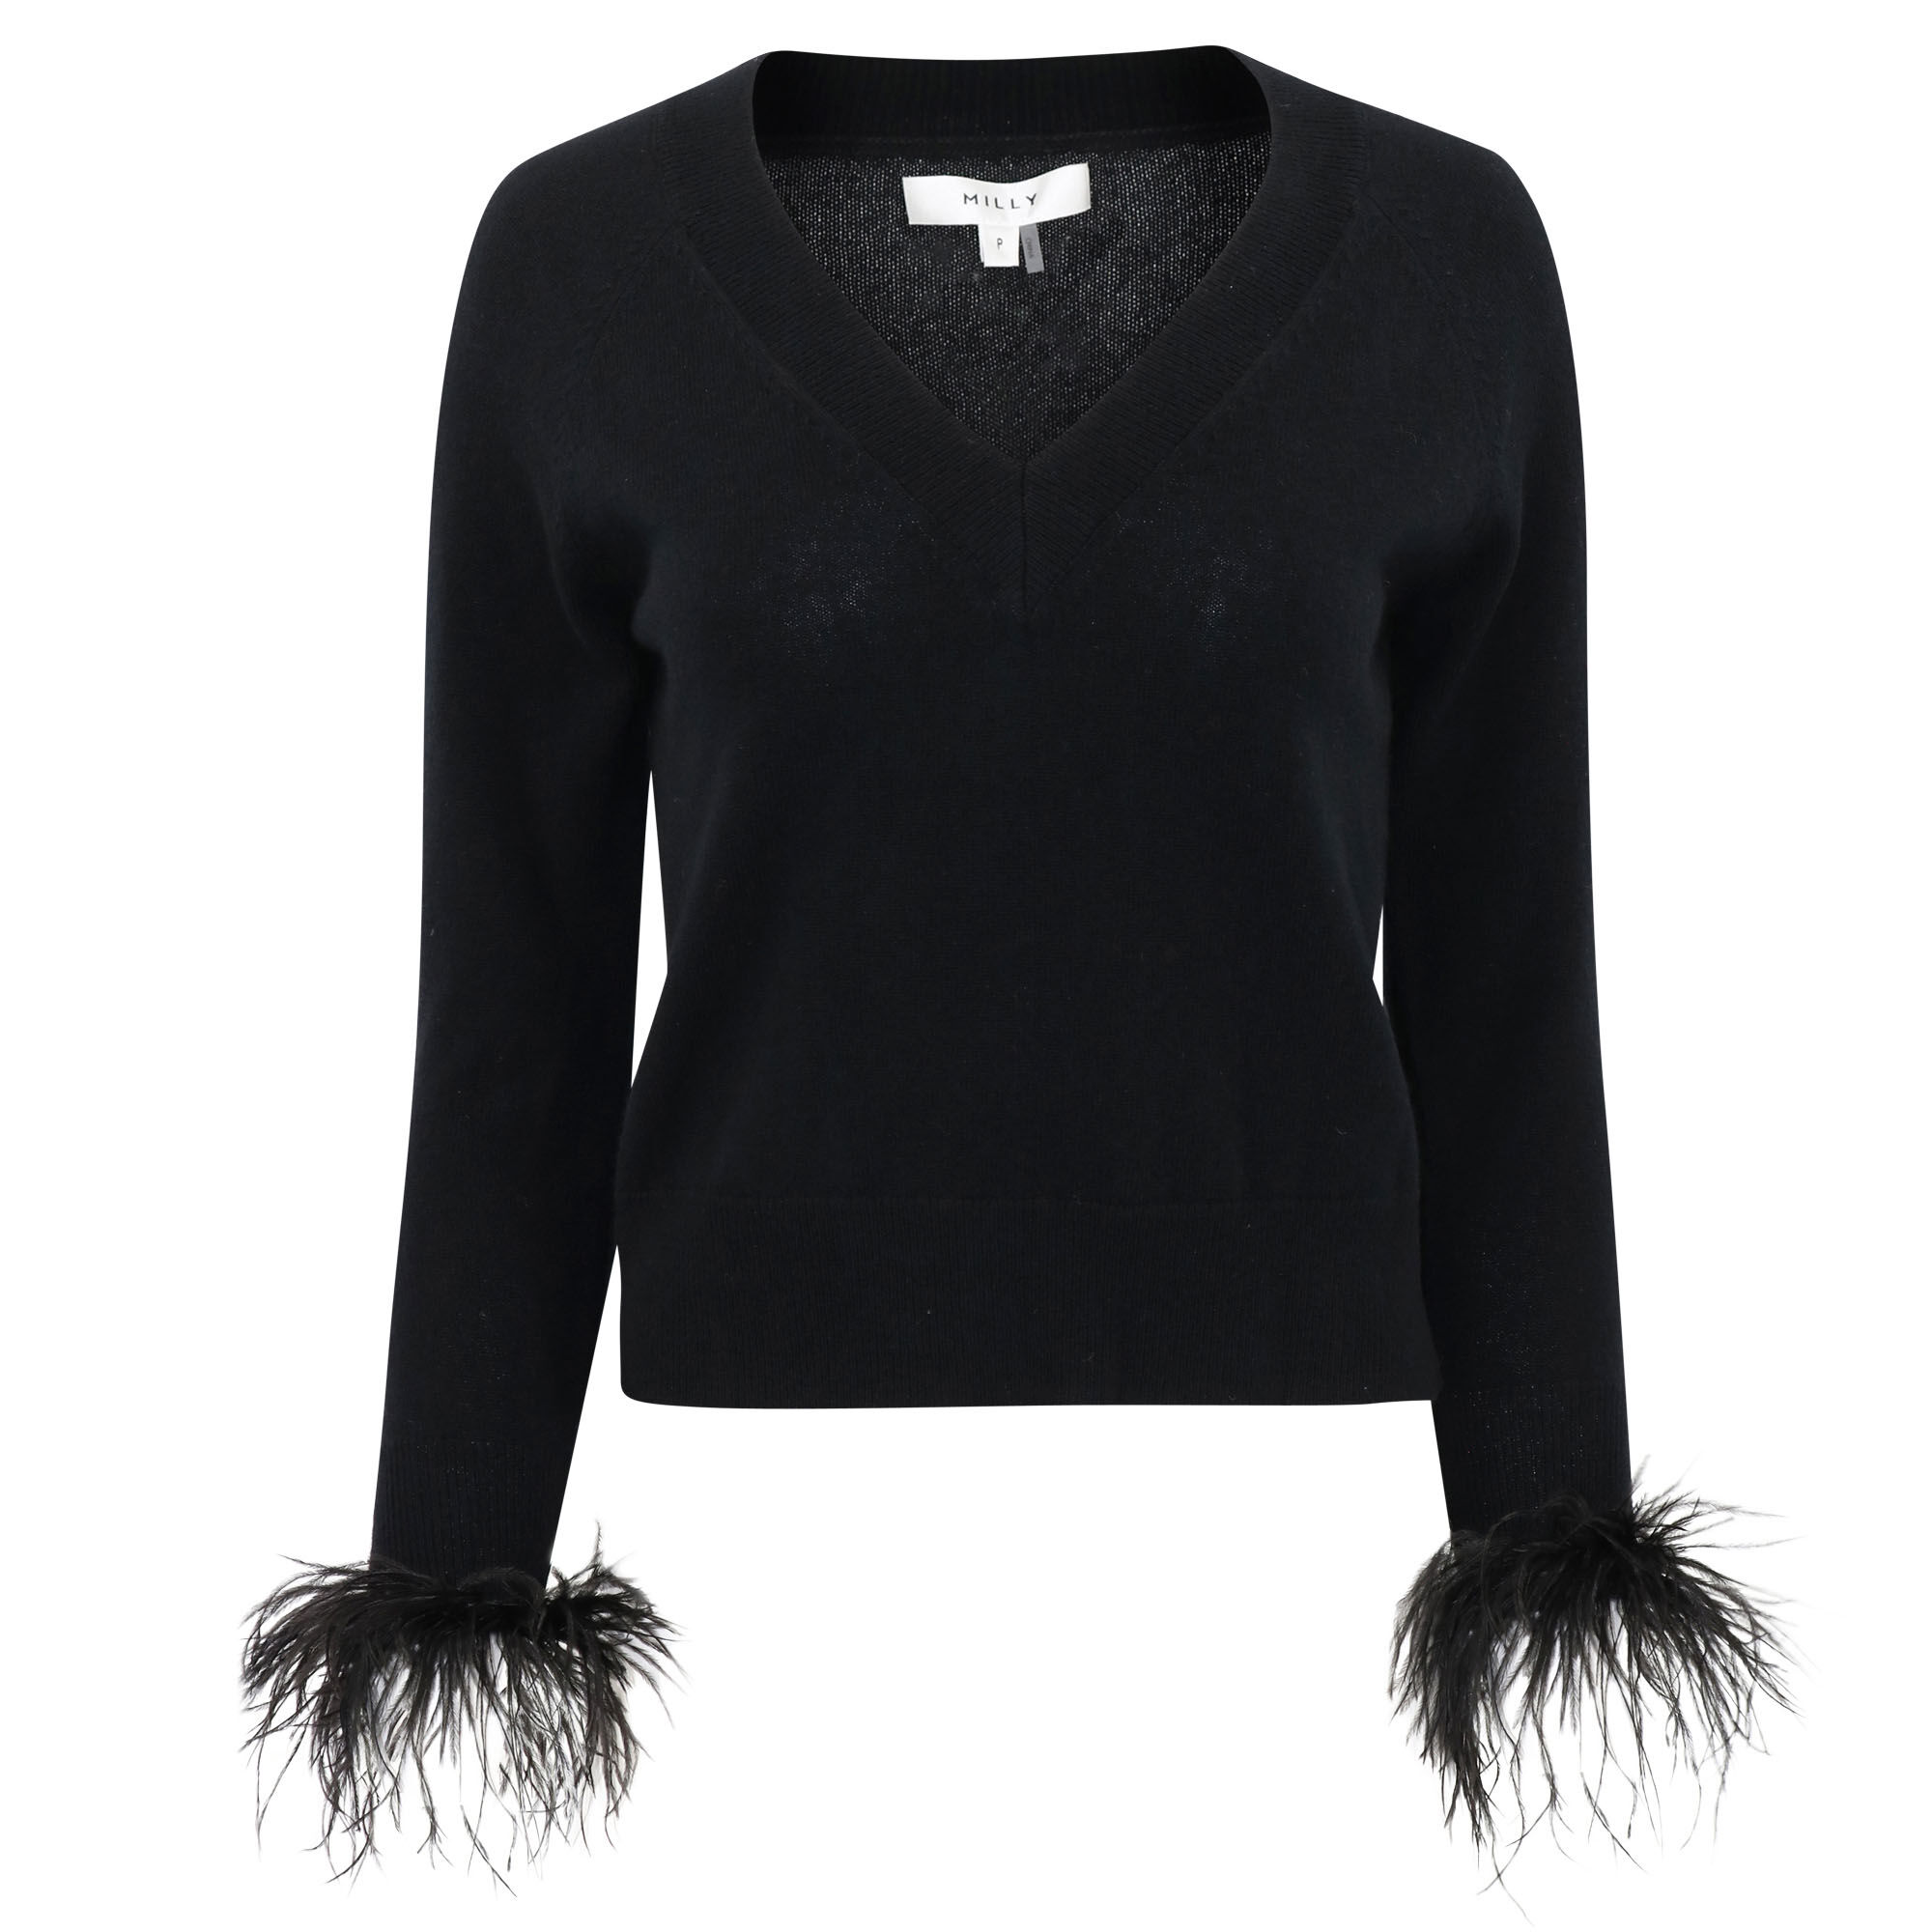 Feather Cuff V-Neck Sweater